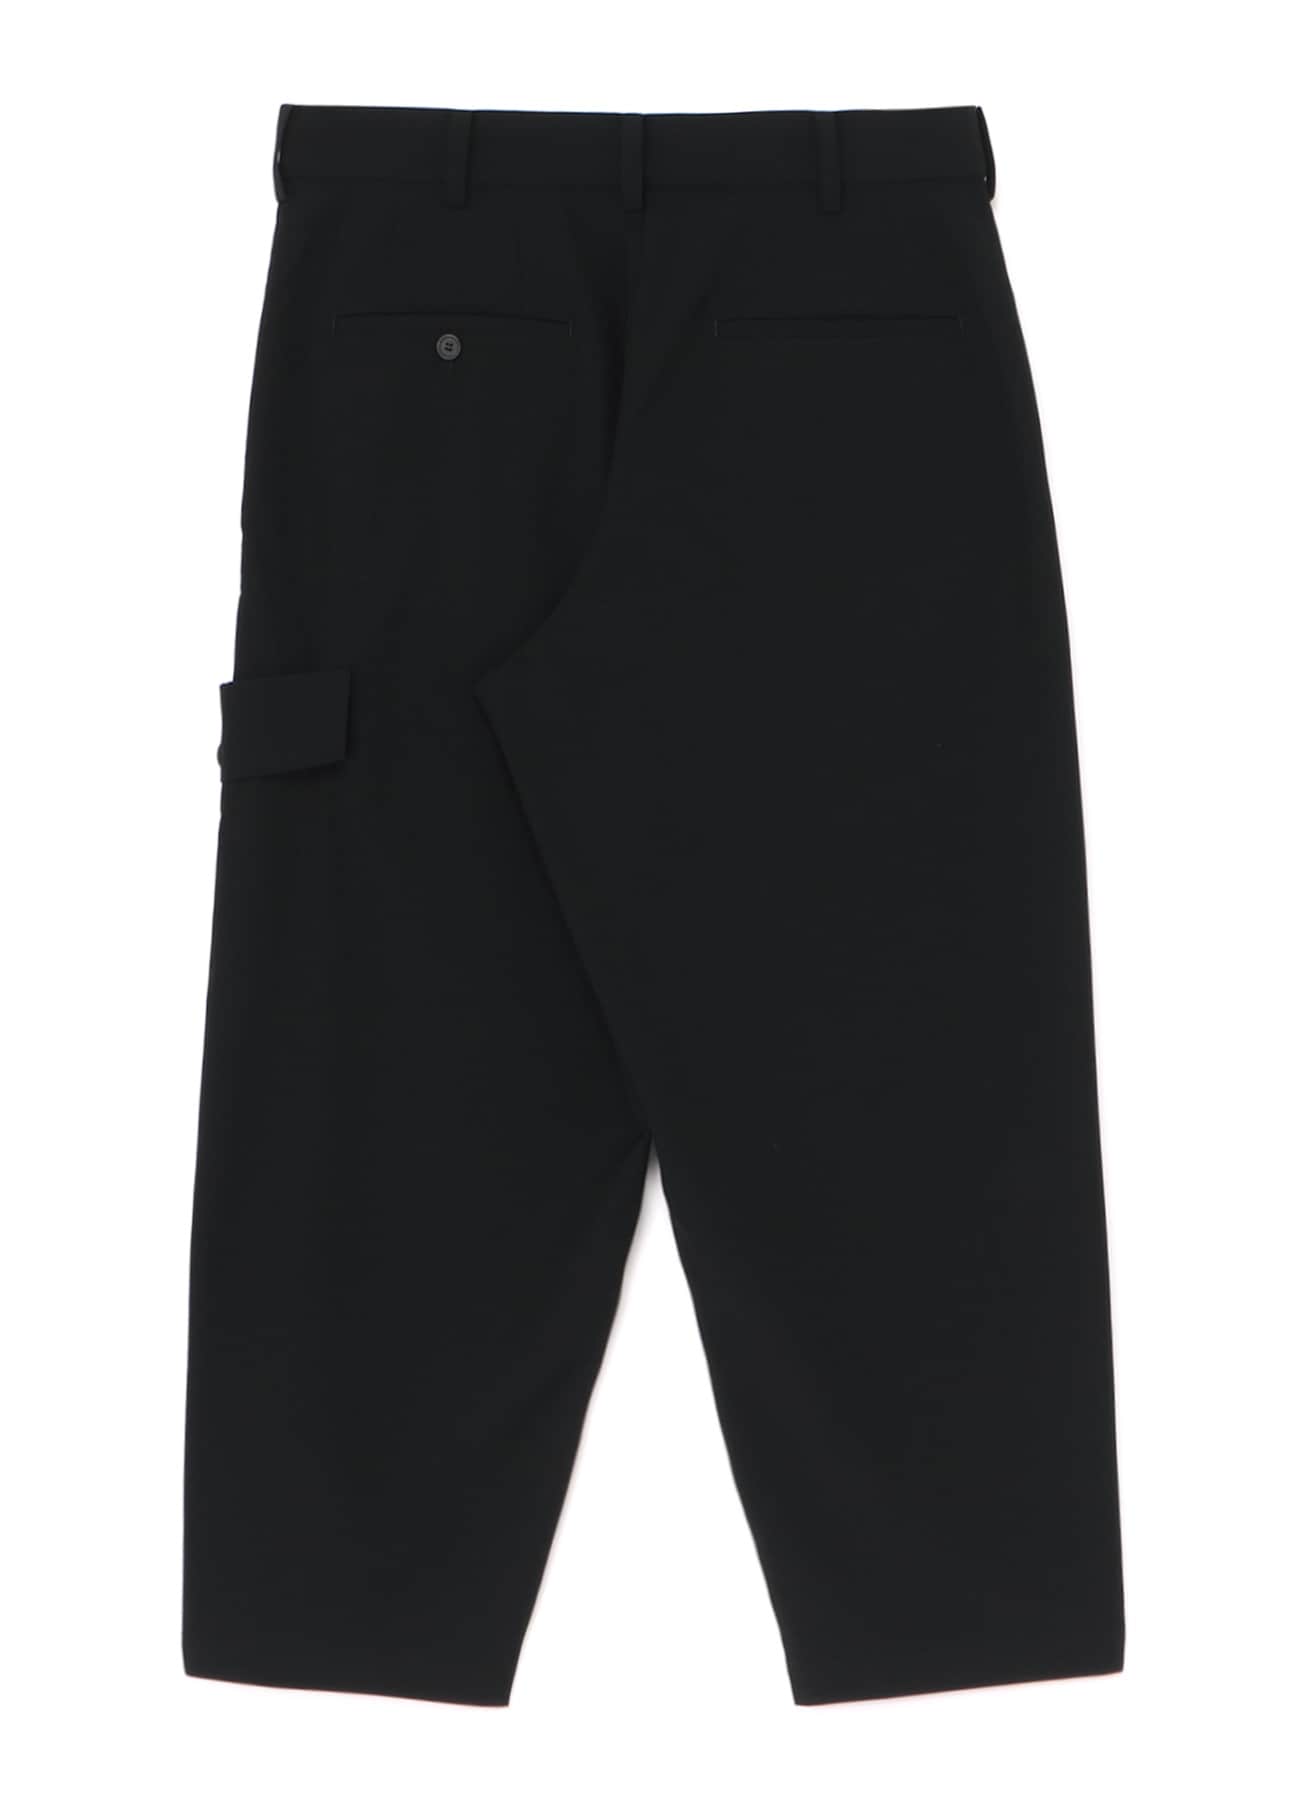 POLYESTER GABARDINE PANTS WITH KNEE FLAP POCKETS(M Black): S'YTE 